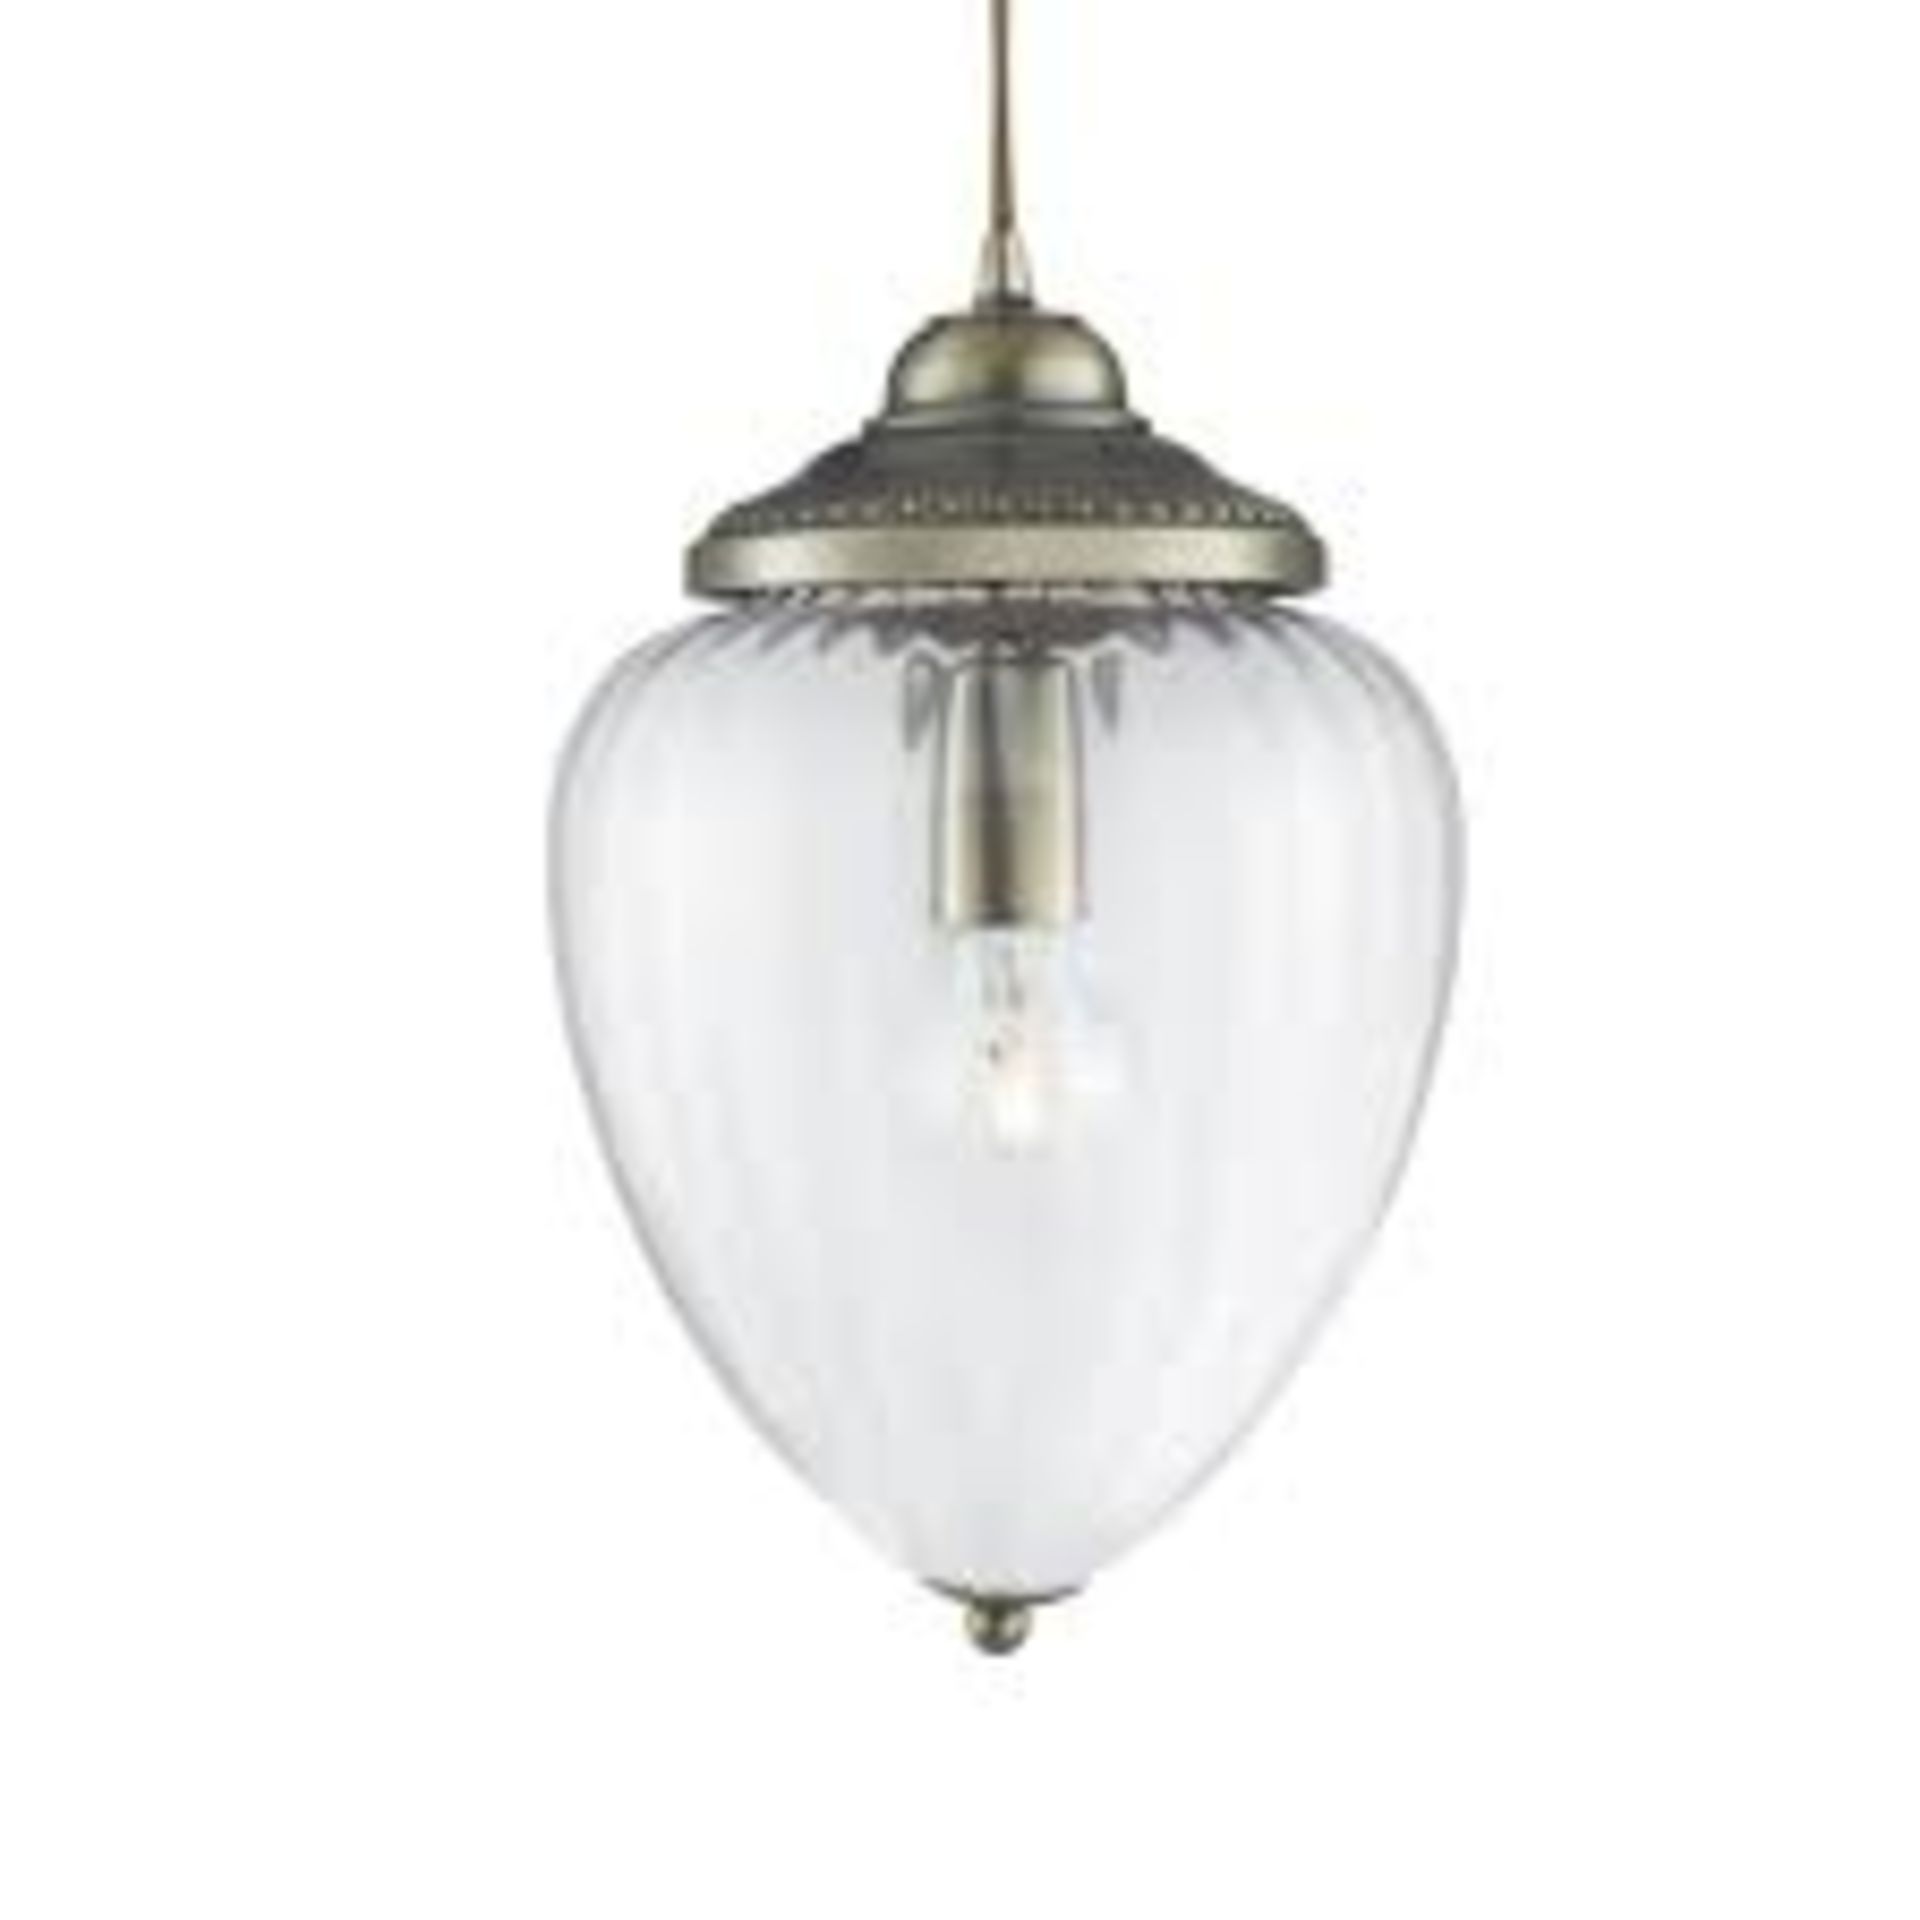 1 x Searchlight Pendant in a chrome finish - Ref: 1091CC - New and Boxed - RRP: £25 - Image 4 of 4